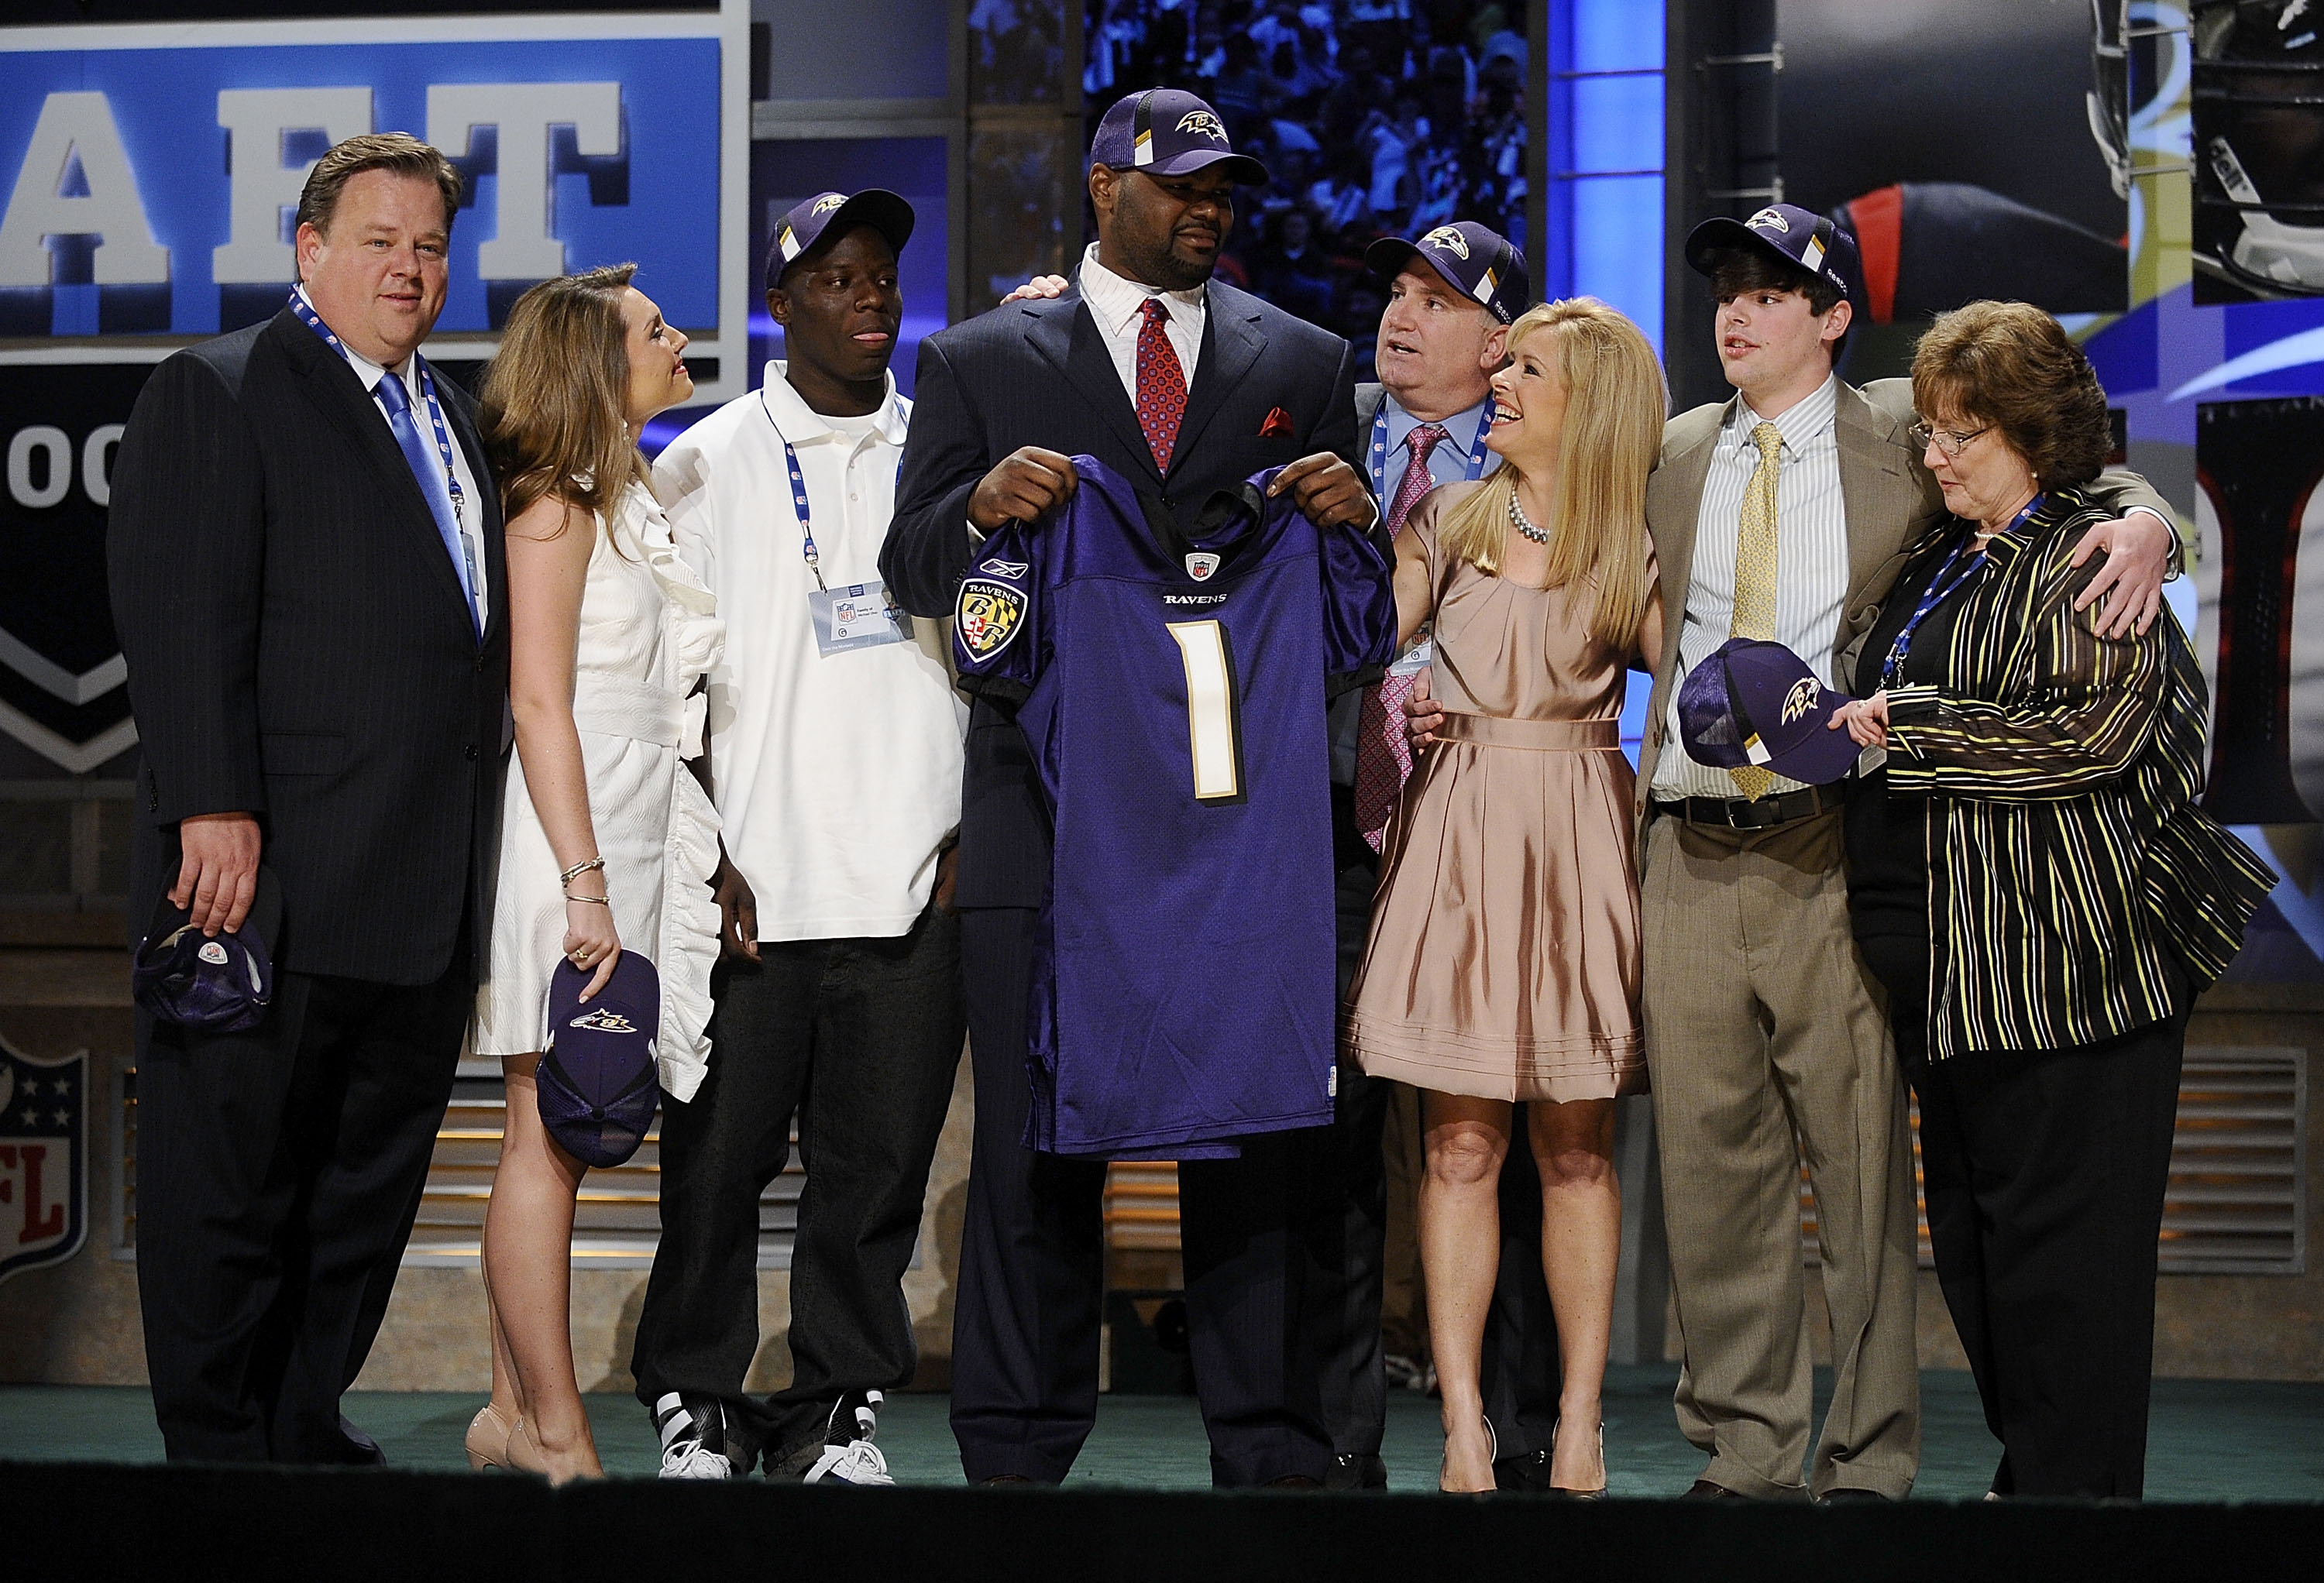 Michael Oher poses for a photograph with the Tuohy family at Radio City Music Hall for the 2009 NFL Draft on April 25, 2009, in New York City. | Source: Getty Images